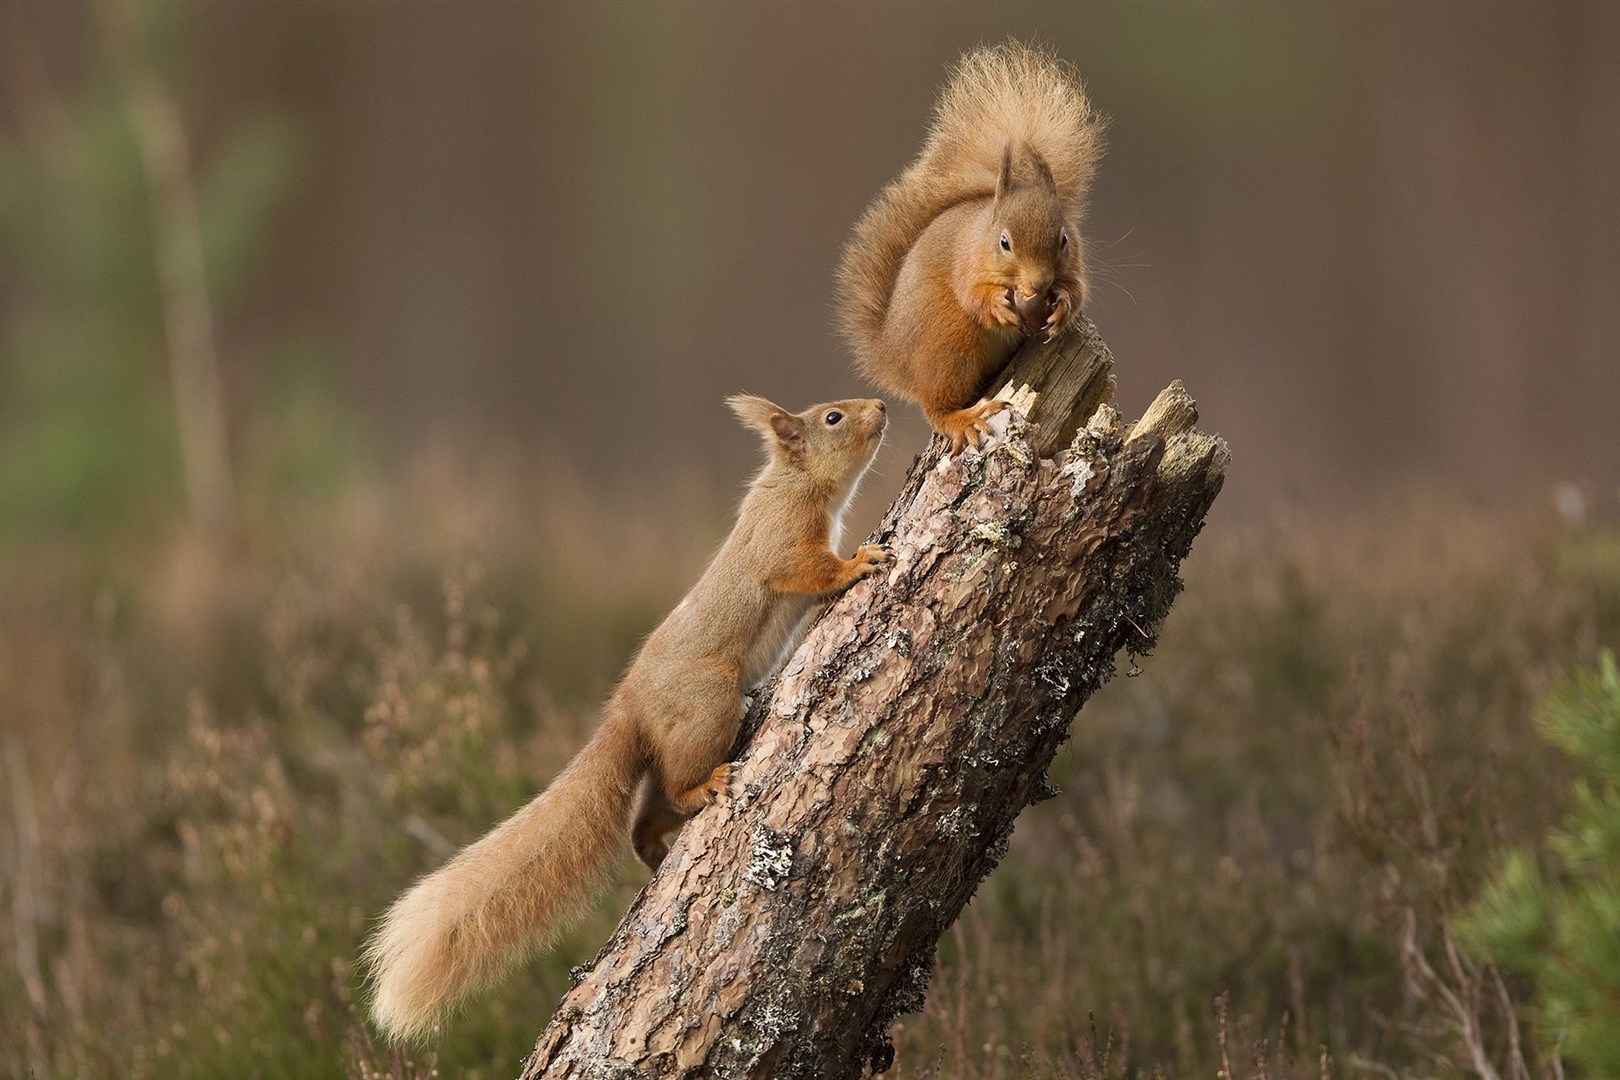 Red squirrel jumping in Scots pine forest, Cairngorms National Park. Picture courtesy of Peter Cairns www.scotlandbigpicture.com